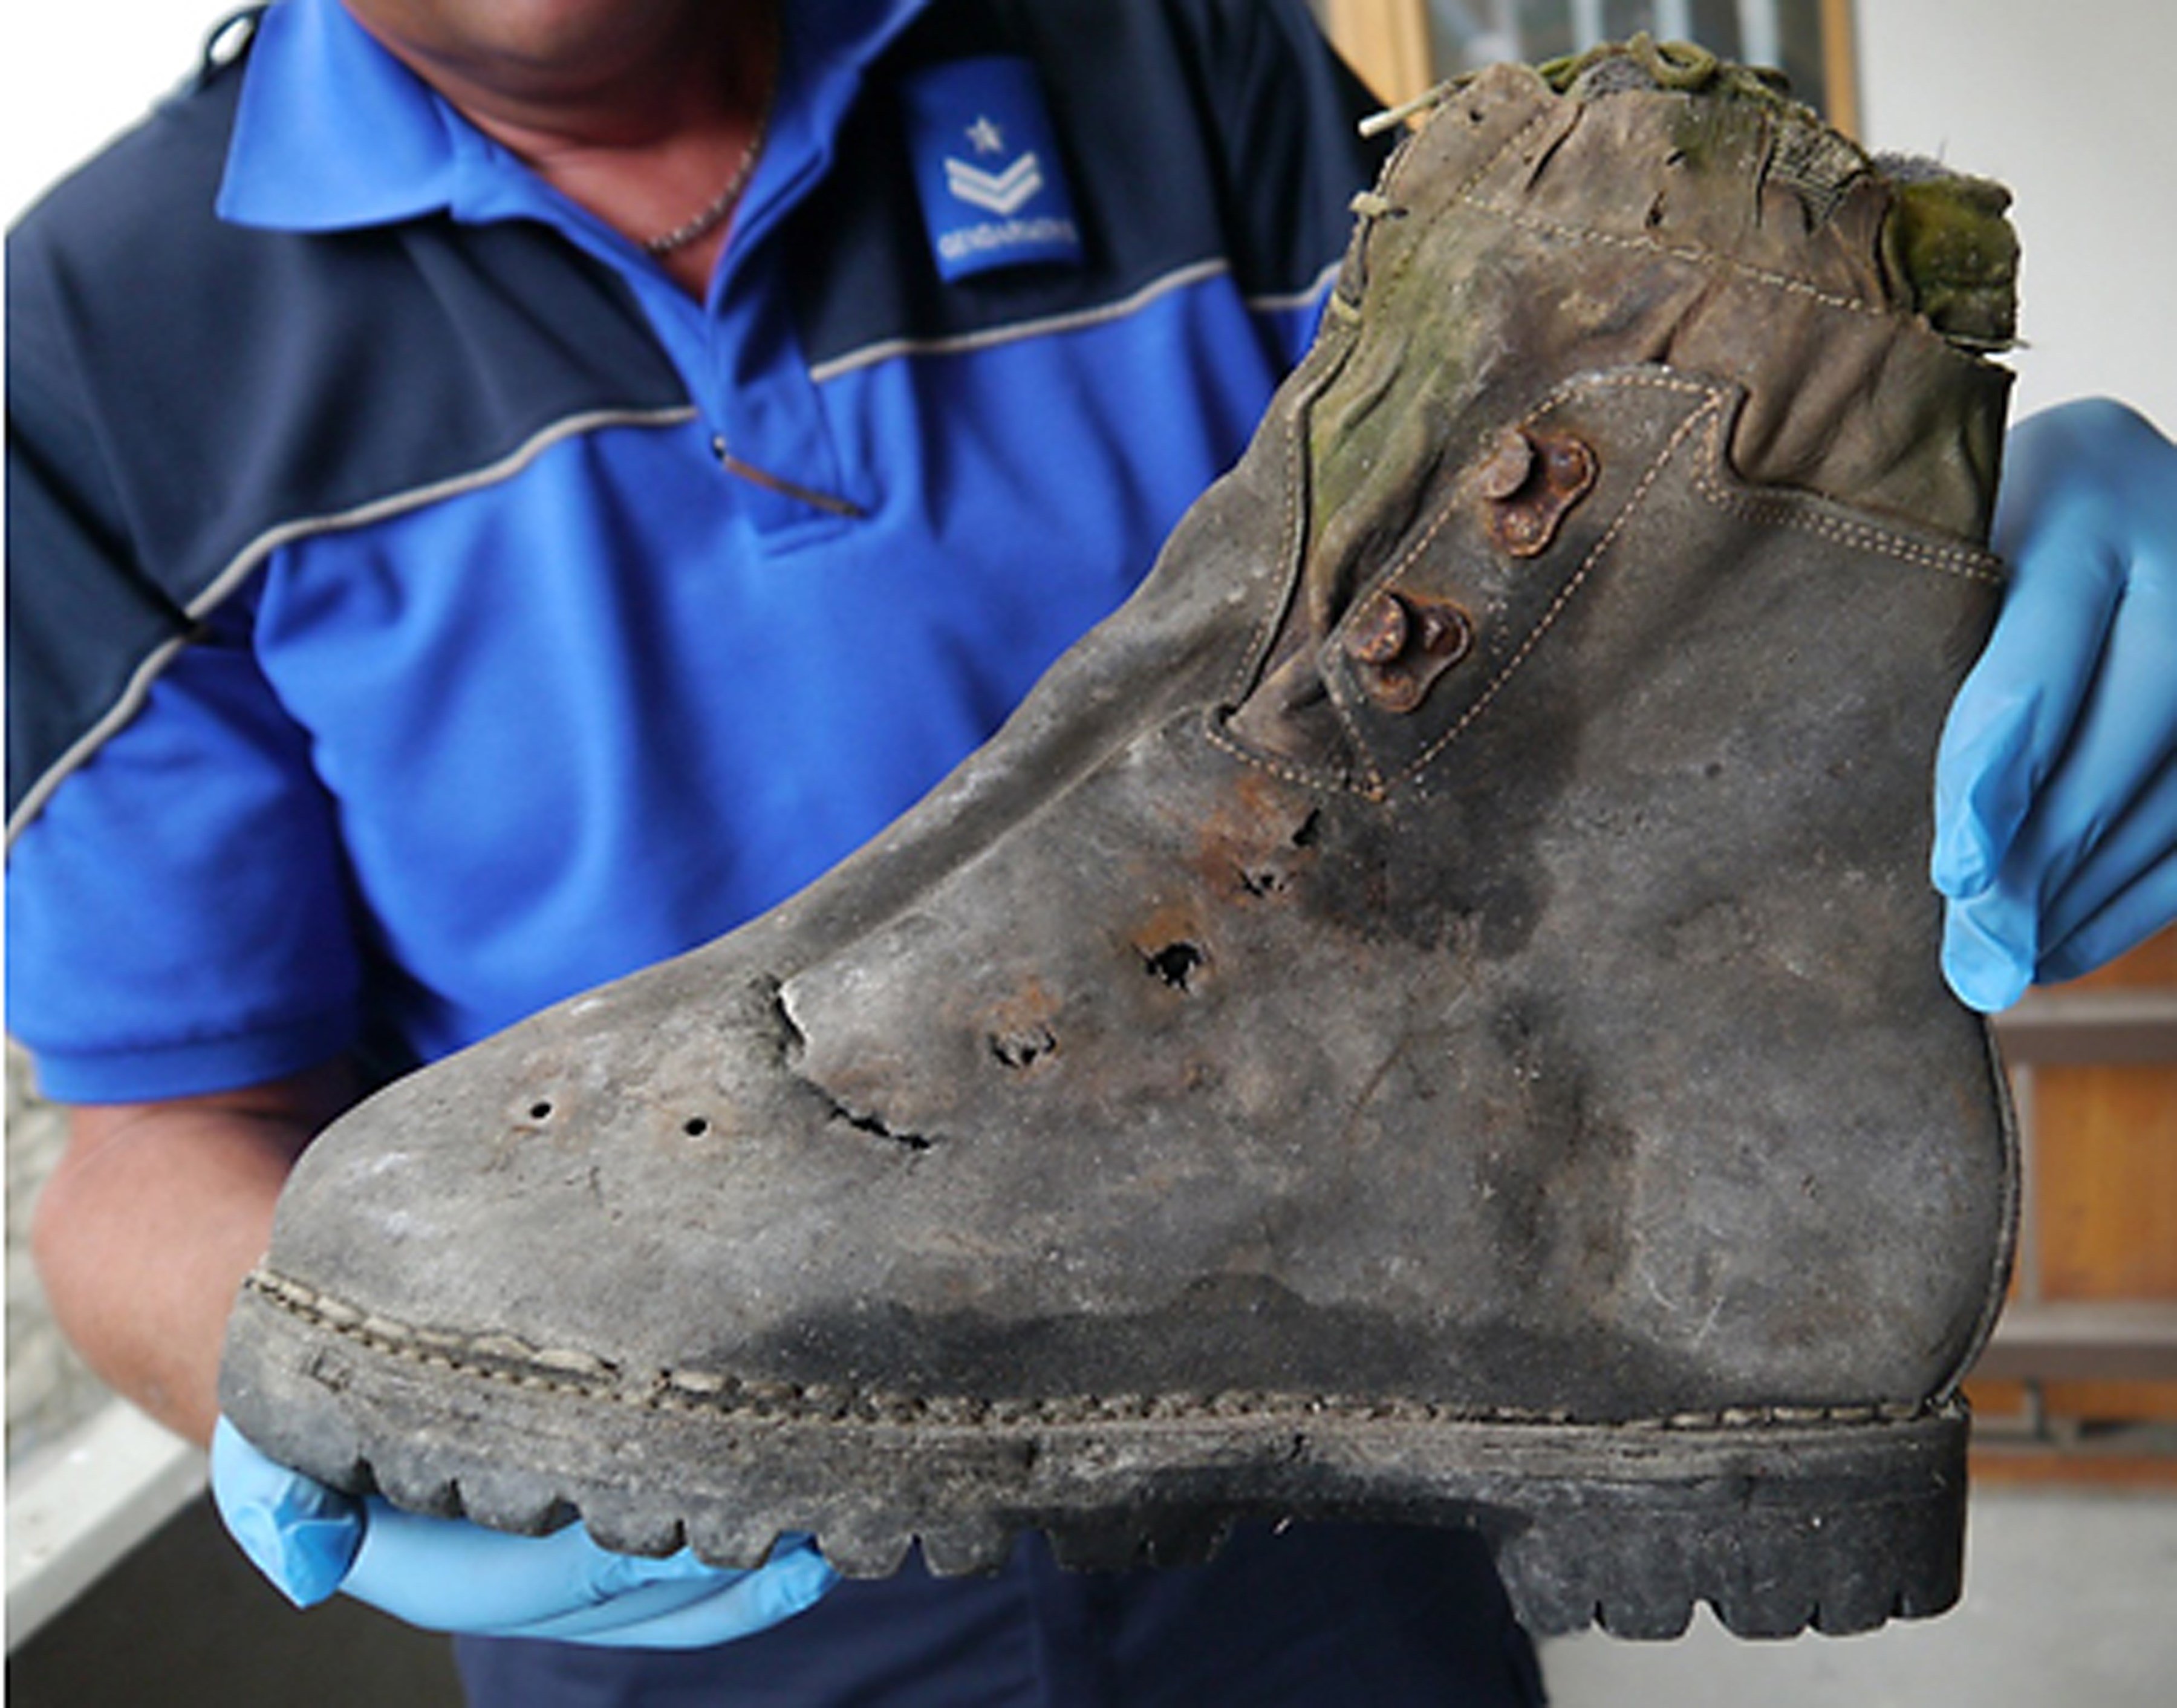 A mountain shoe found next to the remains of two Japanese climbers who disappeared in the Swiss Alps in 1970 on Aug. 6, 2015. (Police Cantonale Valaisanne/AFP/Getty Images)